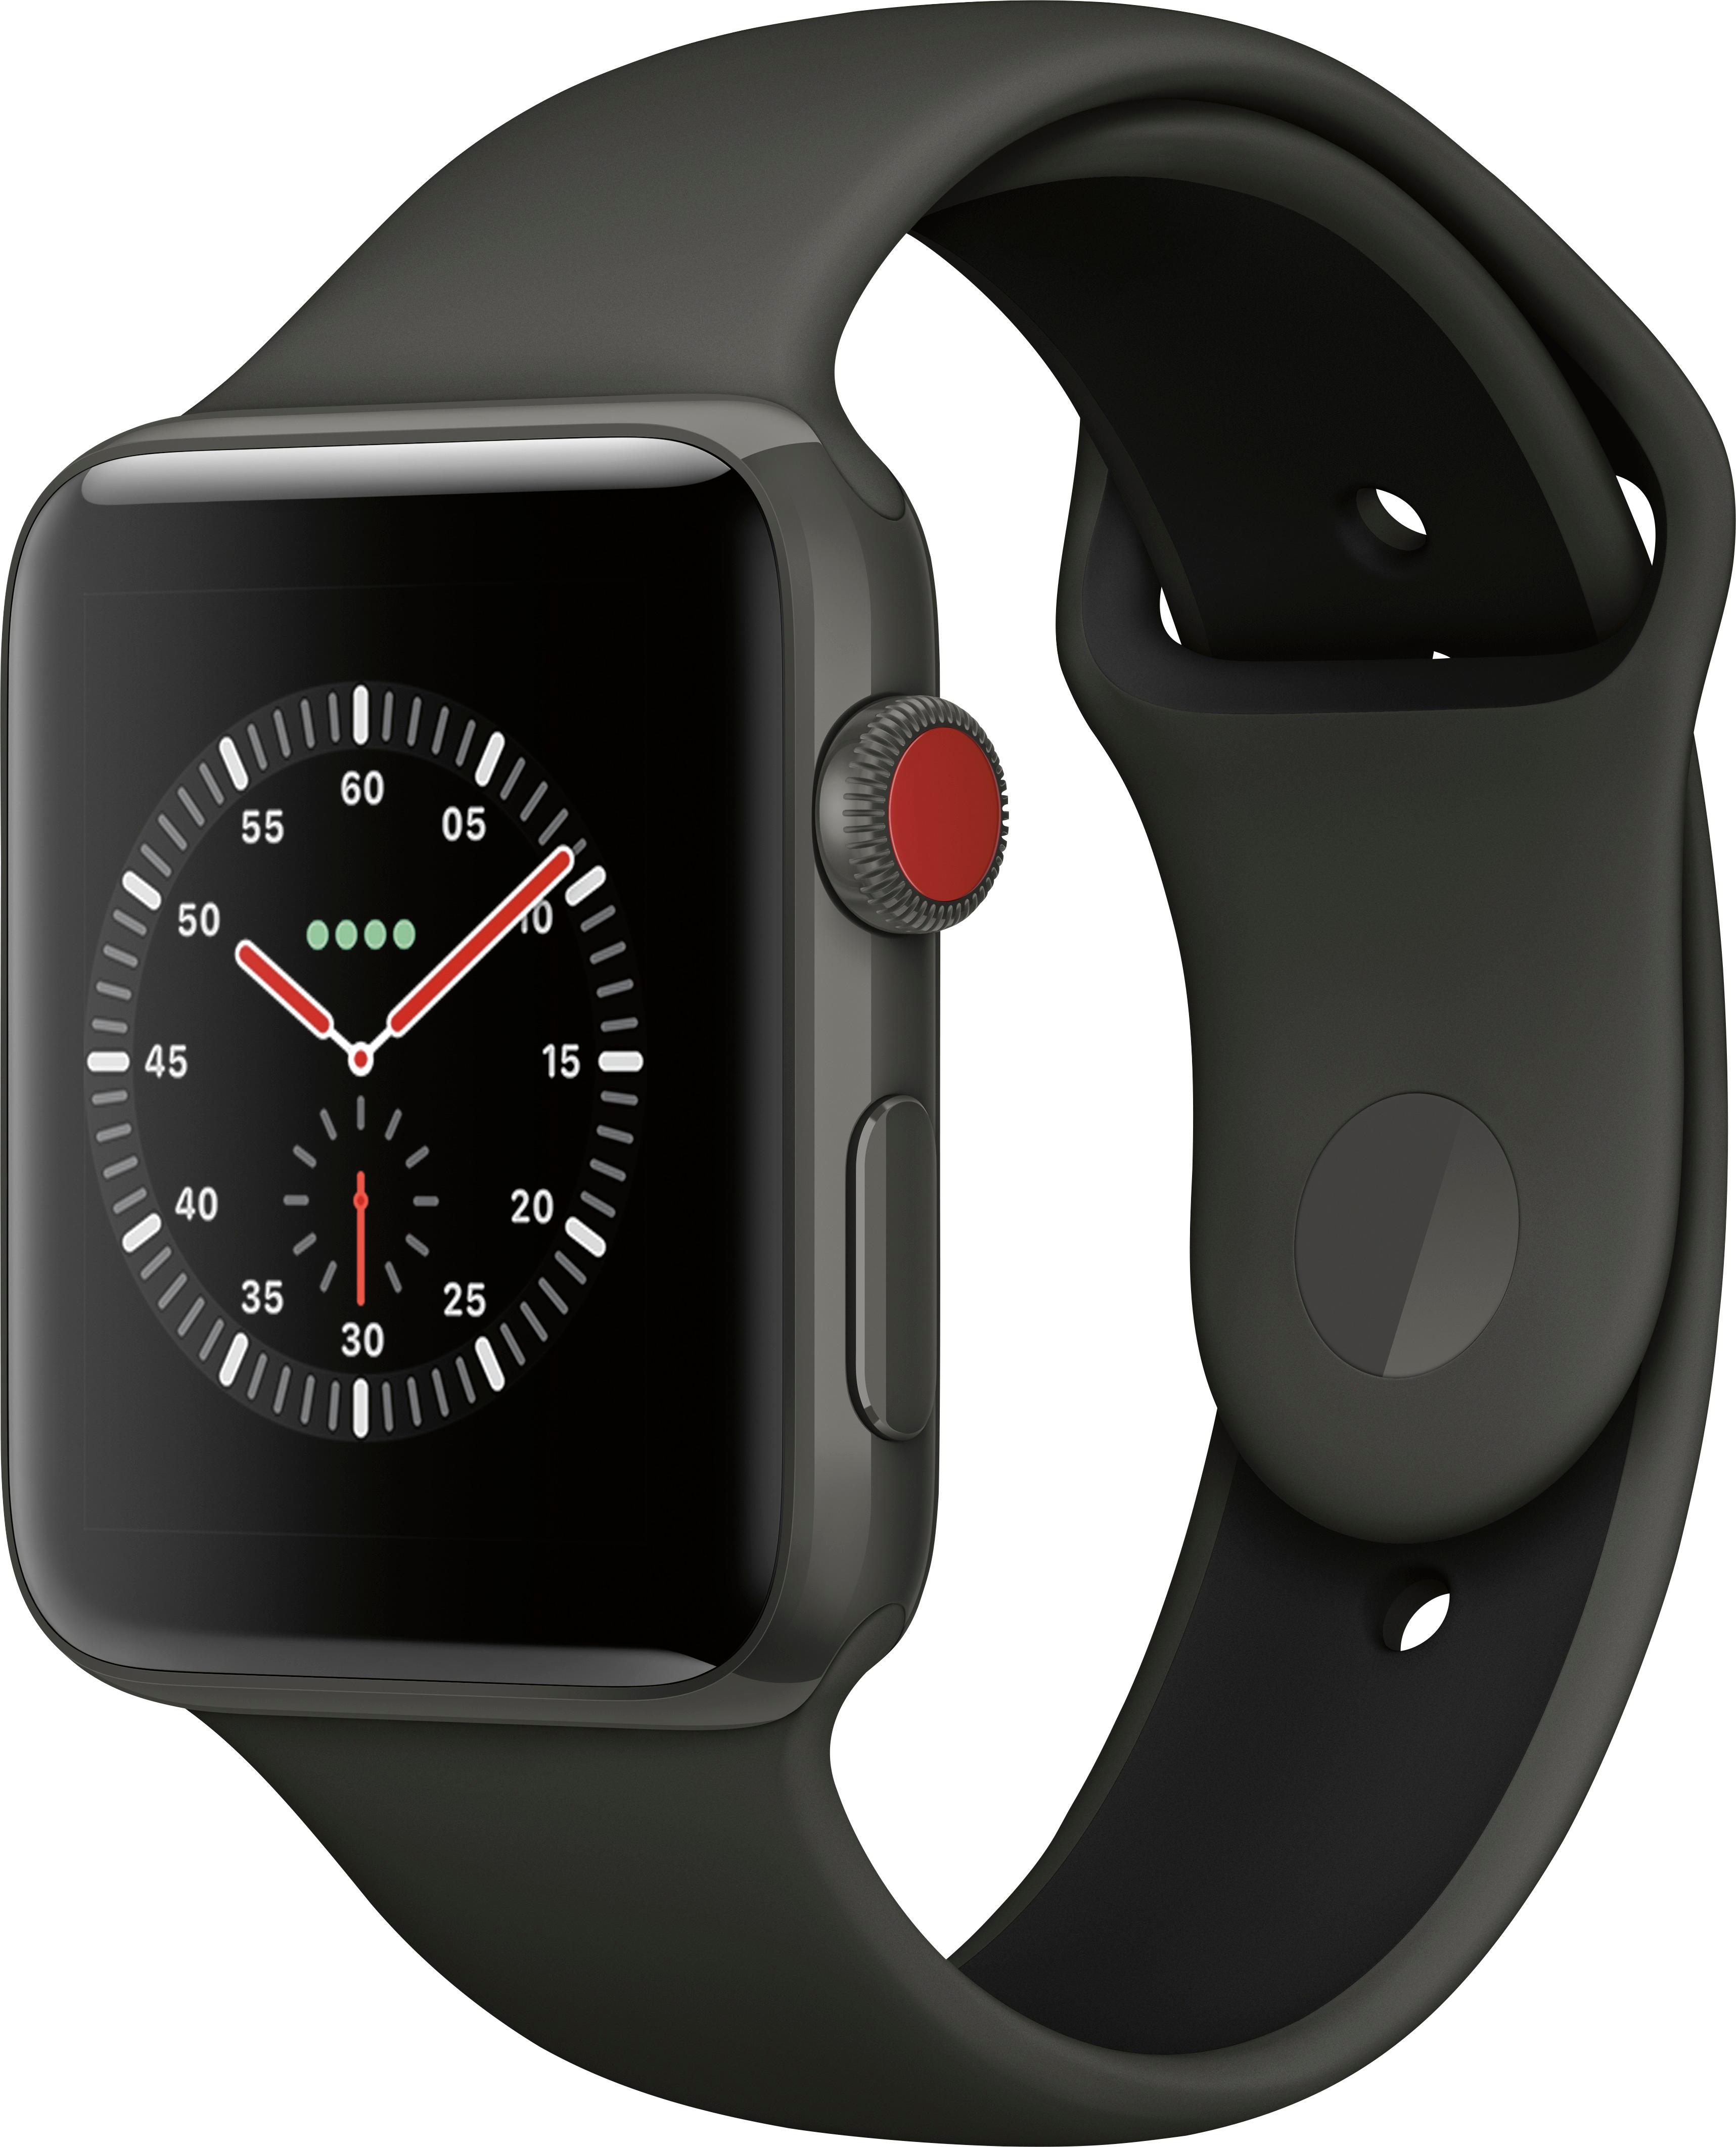 Apple - Geek Squad Certified Refurbished Apple Watch Edition (GPS + Cellular) 42mm with Gray/Black Sport Band - Gray Ceramic